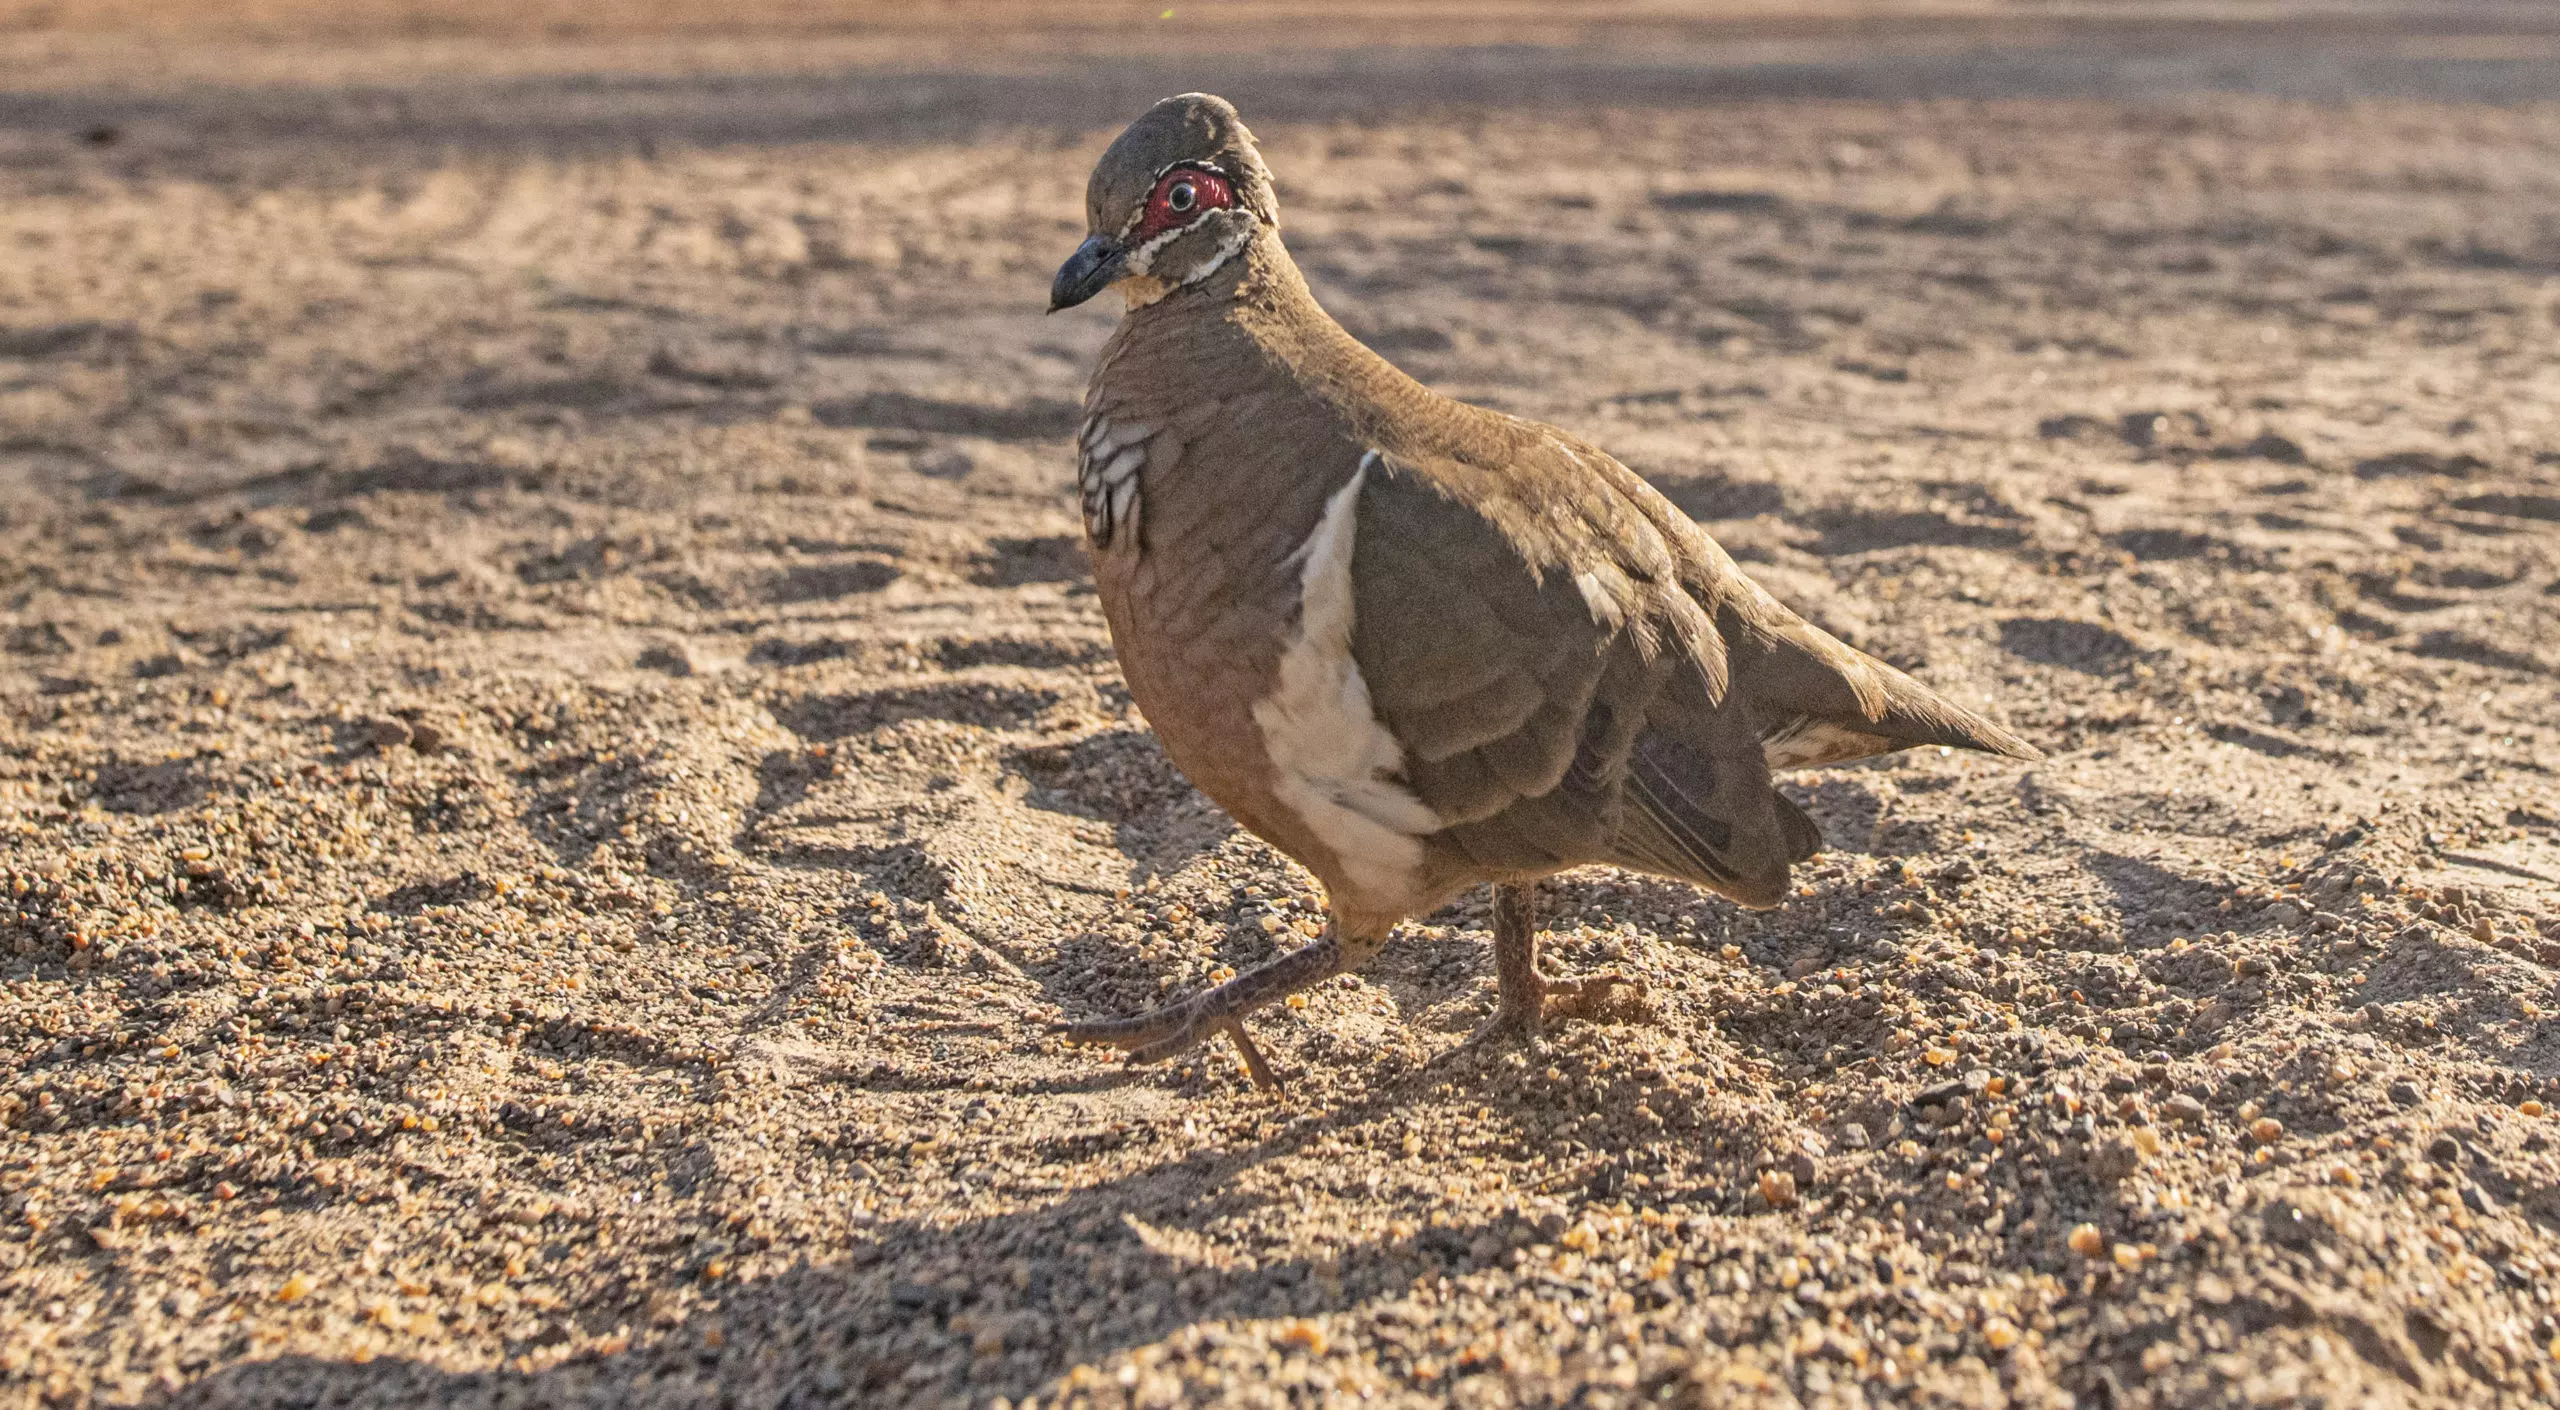 Photo of a partridge pigeon, a threatened species found in the Northern Territory.